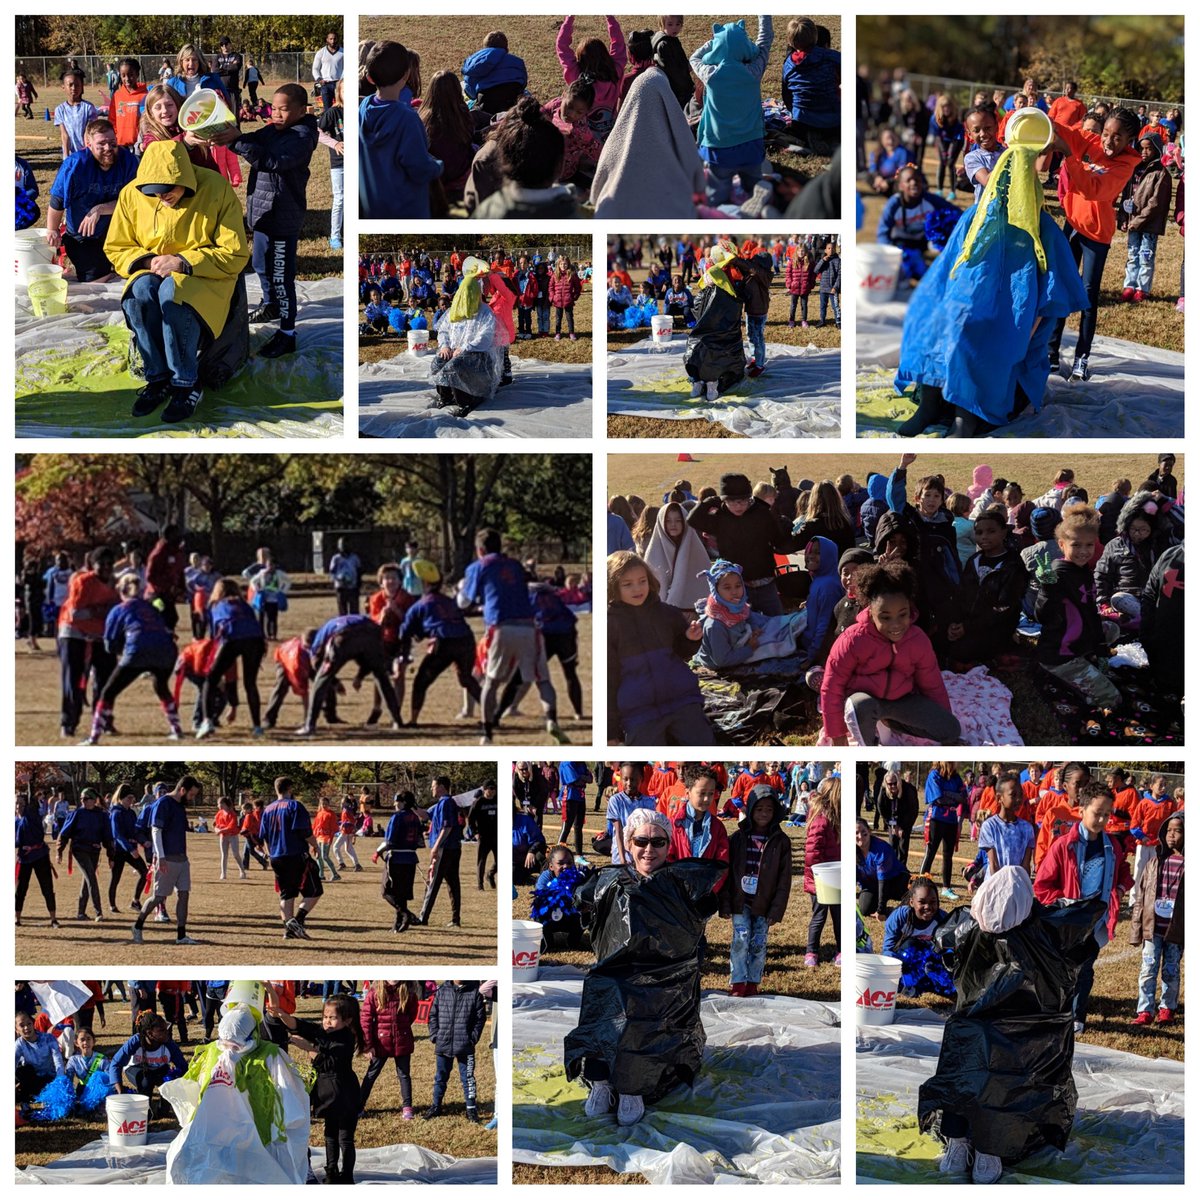 Gator Bowl 2018 was so much fun, and during halftime teachers got slimed as part of our food drive. Great way to kick off the Thanksgiving holiday. #gatorbowl2018 #traditions #gatorgreat #glenwoodrocks #barbasowlets #GlenwoodKidsDeserveIt @GlenwoodES